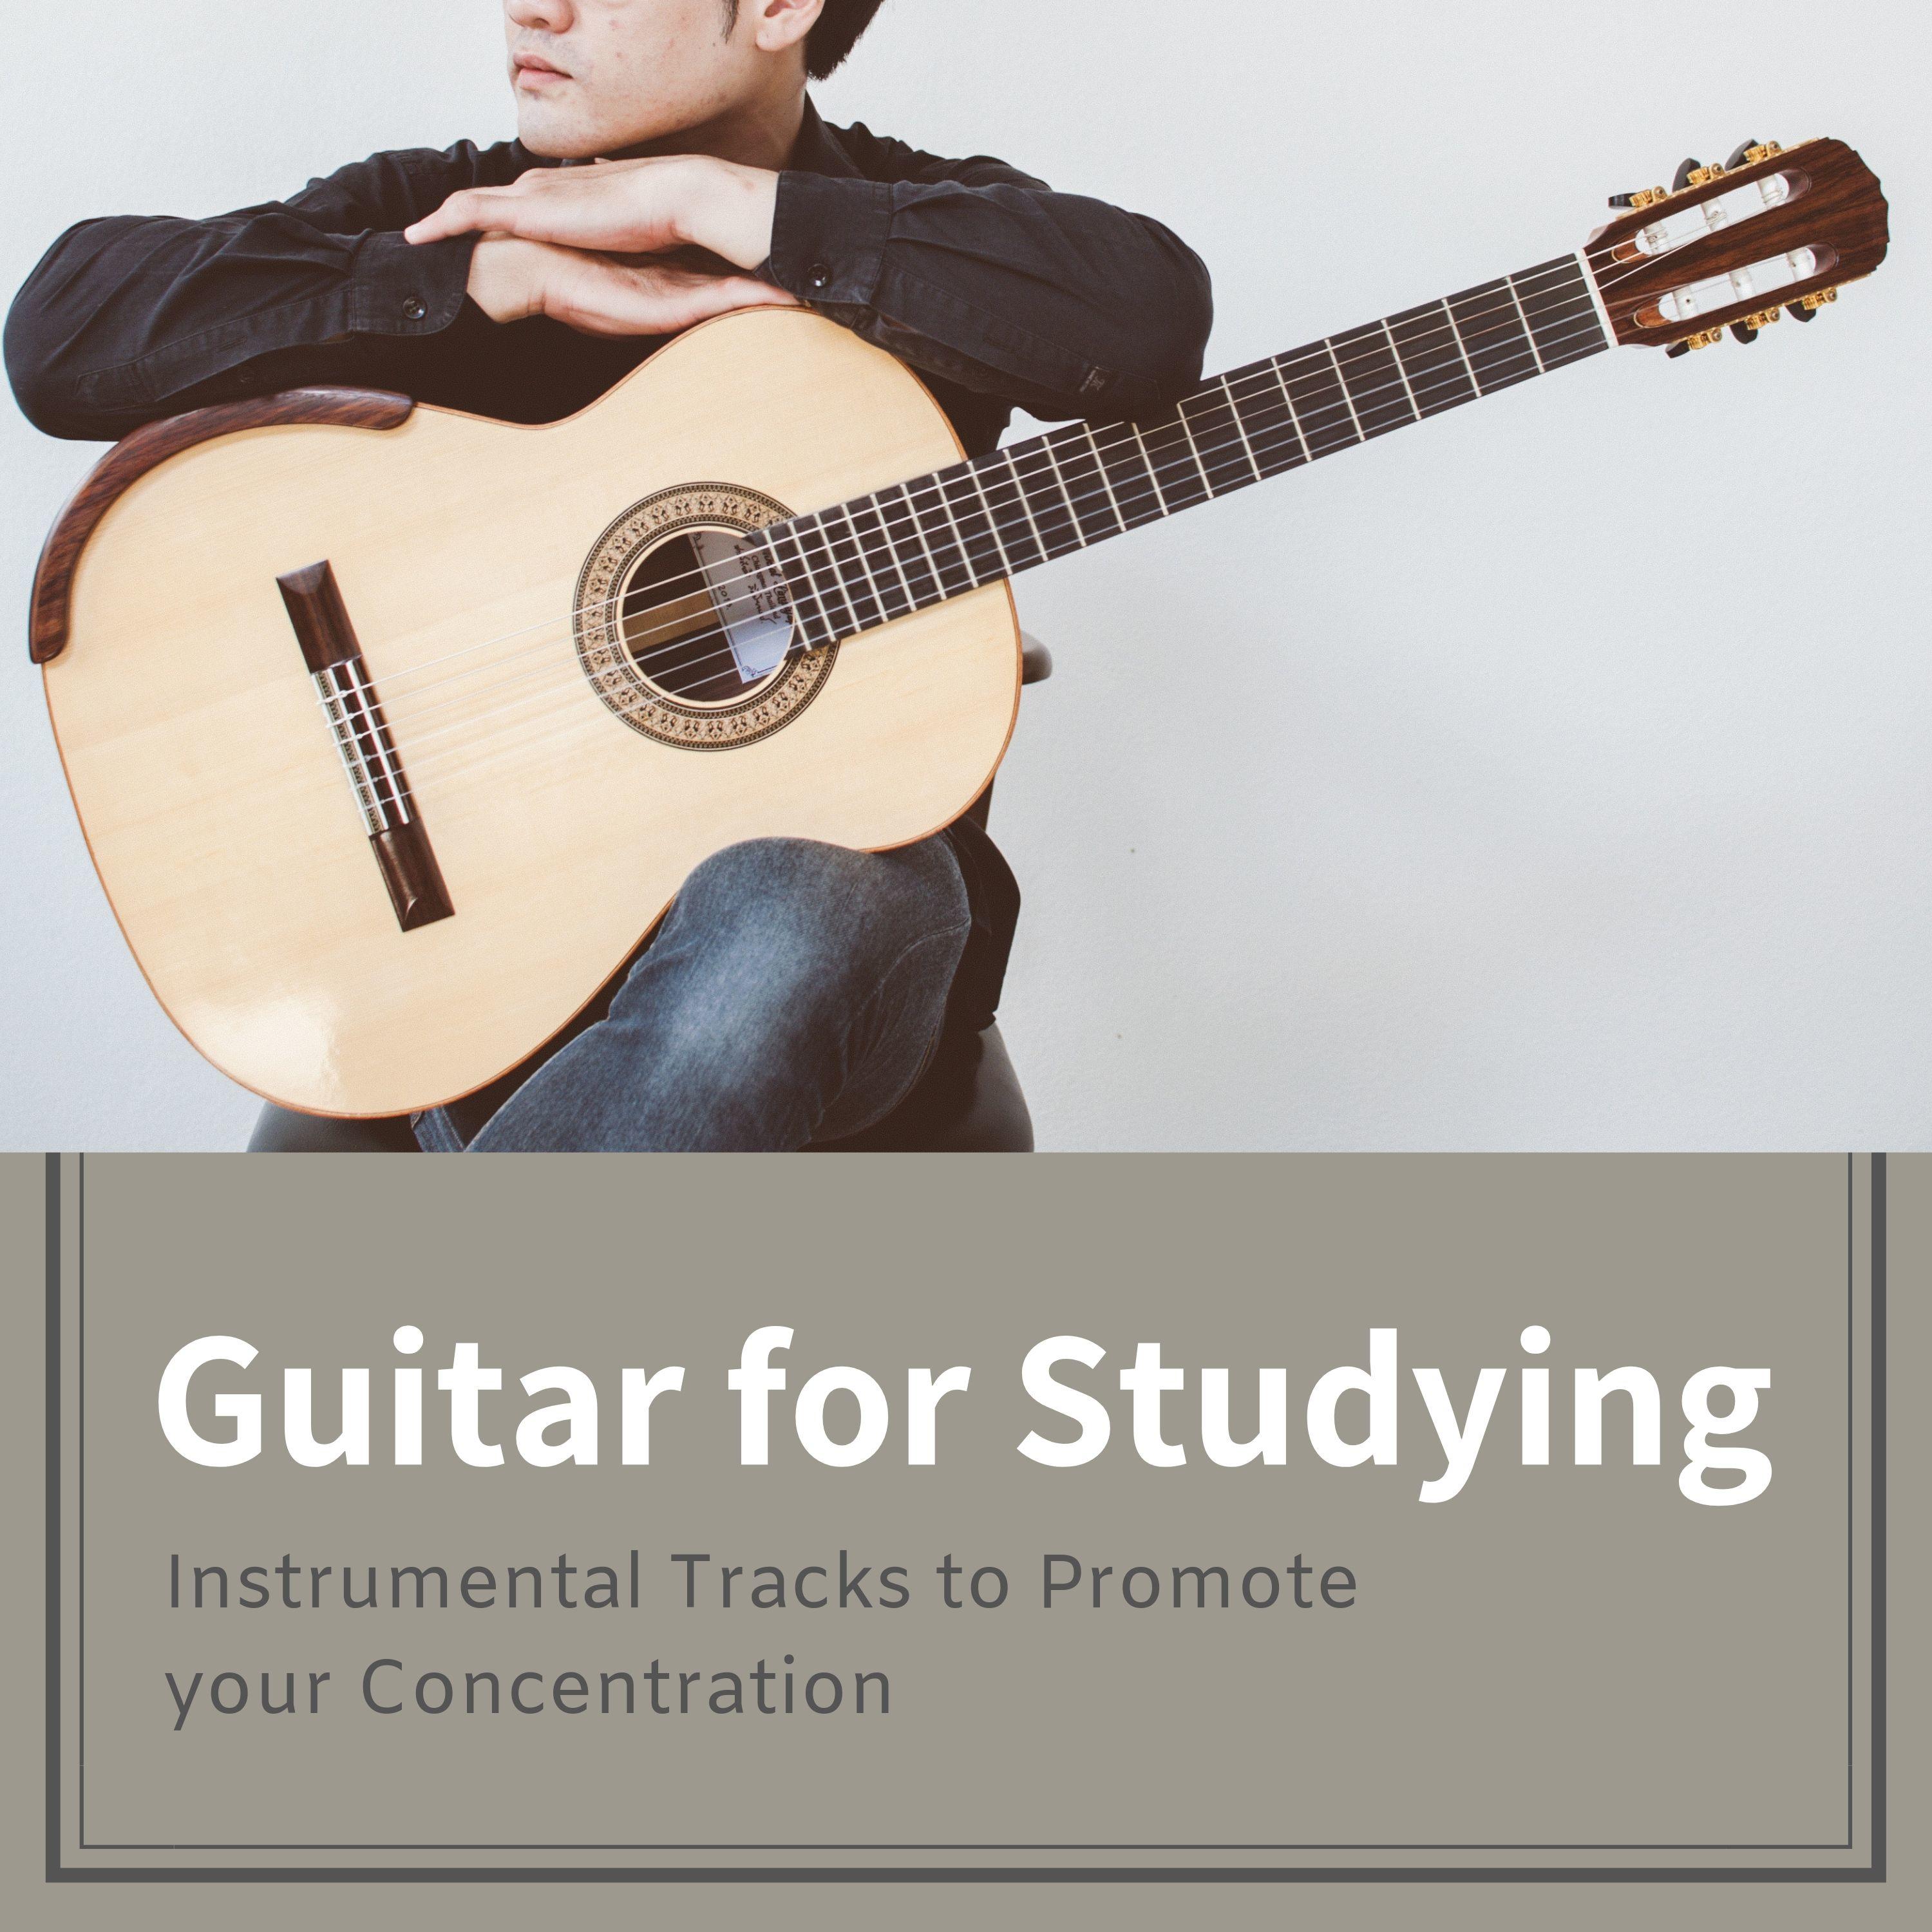 Guitar for Studying: Instrumental Tracks to Promote your Concentration